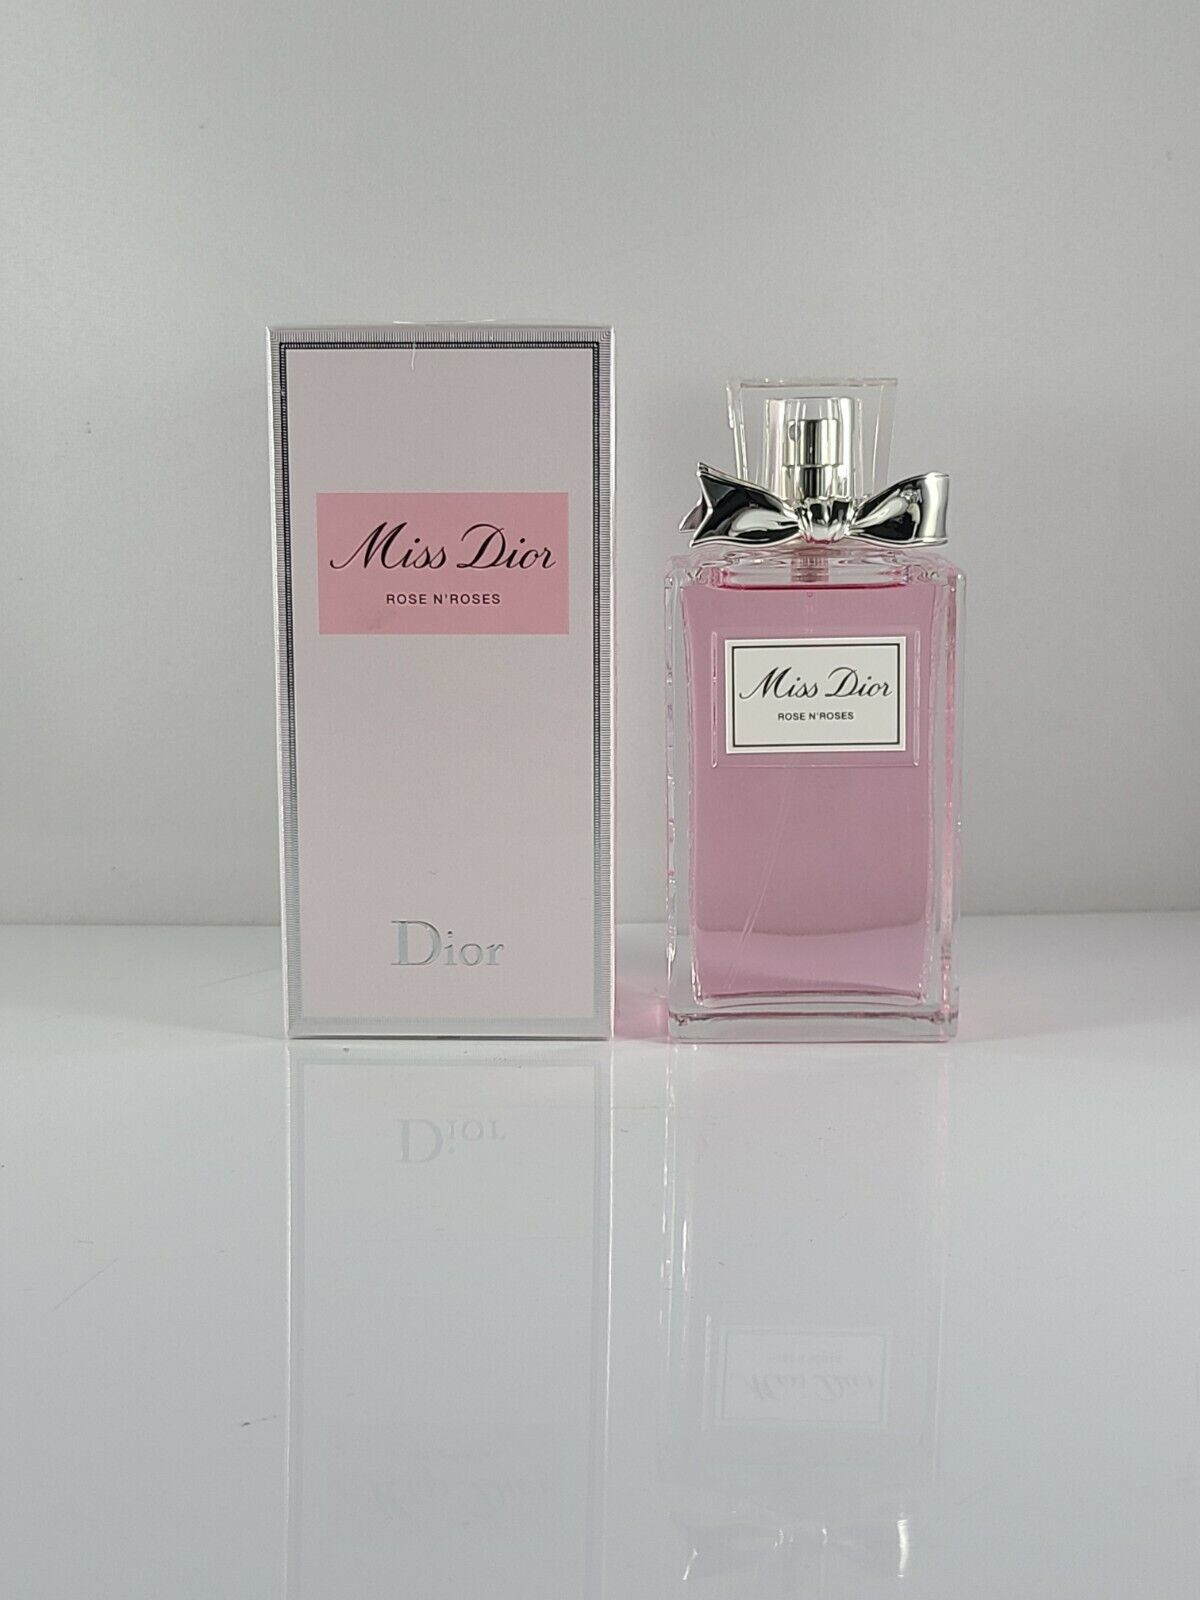 Miss Dior Rose N'Roses Perfume by Christian Dior 3.4 Oz. EDT Spray for Women. - $94.05